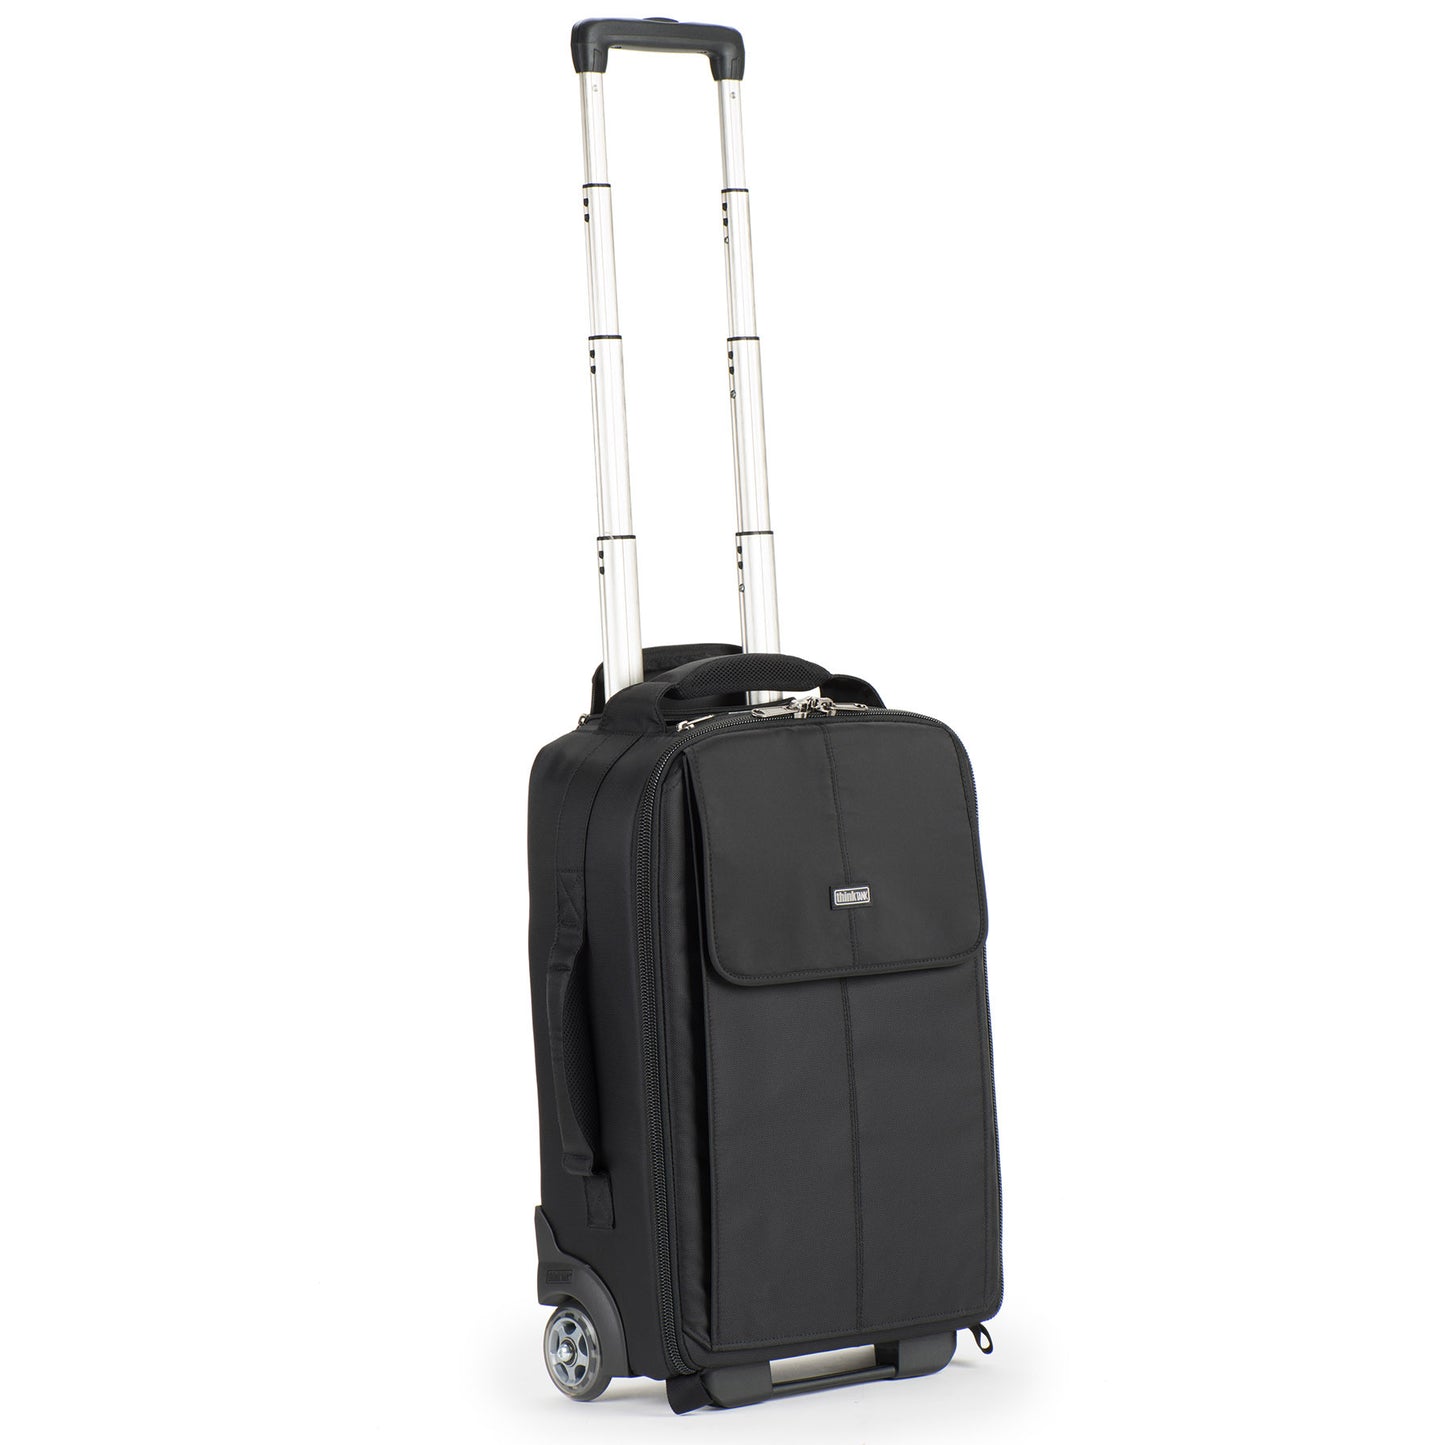 Our Long-term Review of the Think Tank Airport Security Trolley